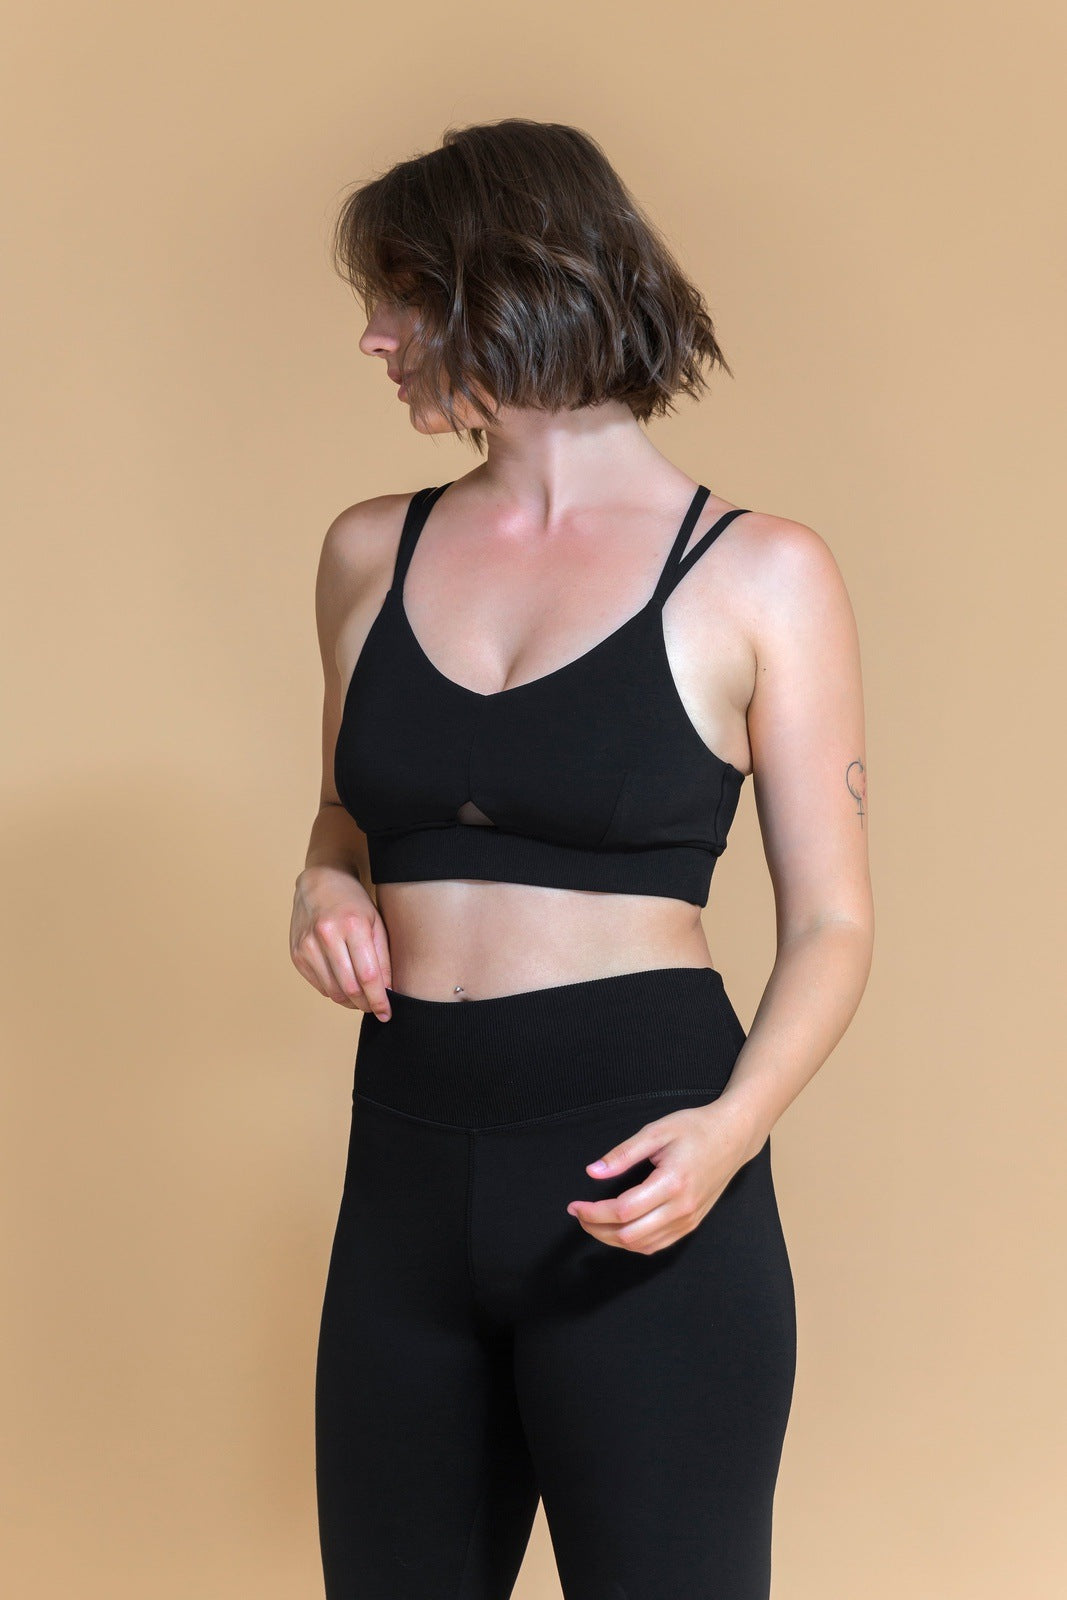 Ethical Yoga Bras and Tops for Active Women